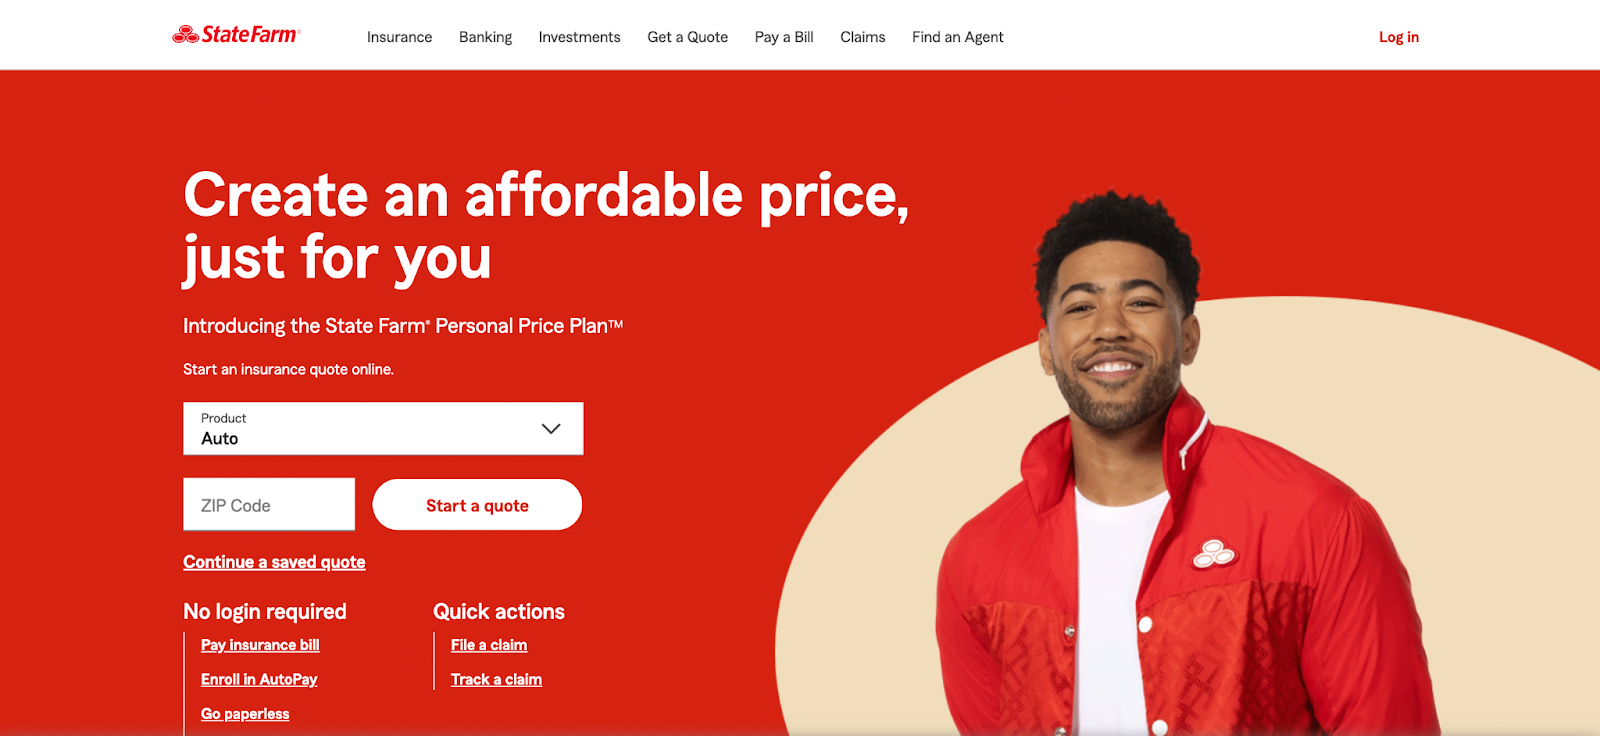 Insurance website design, example from State Farm